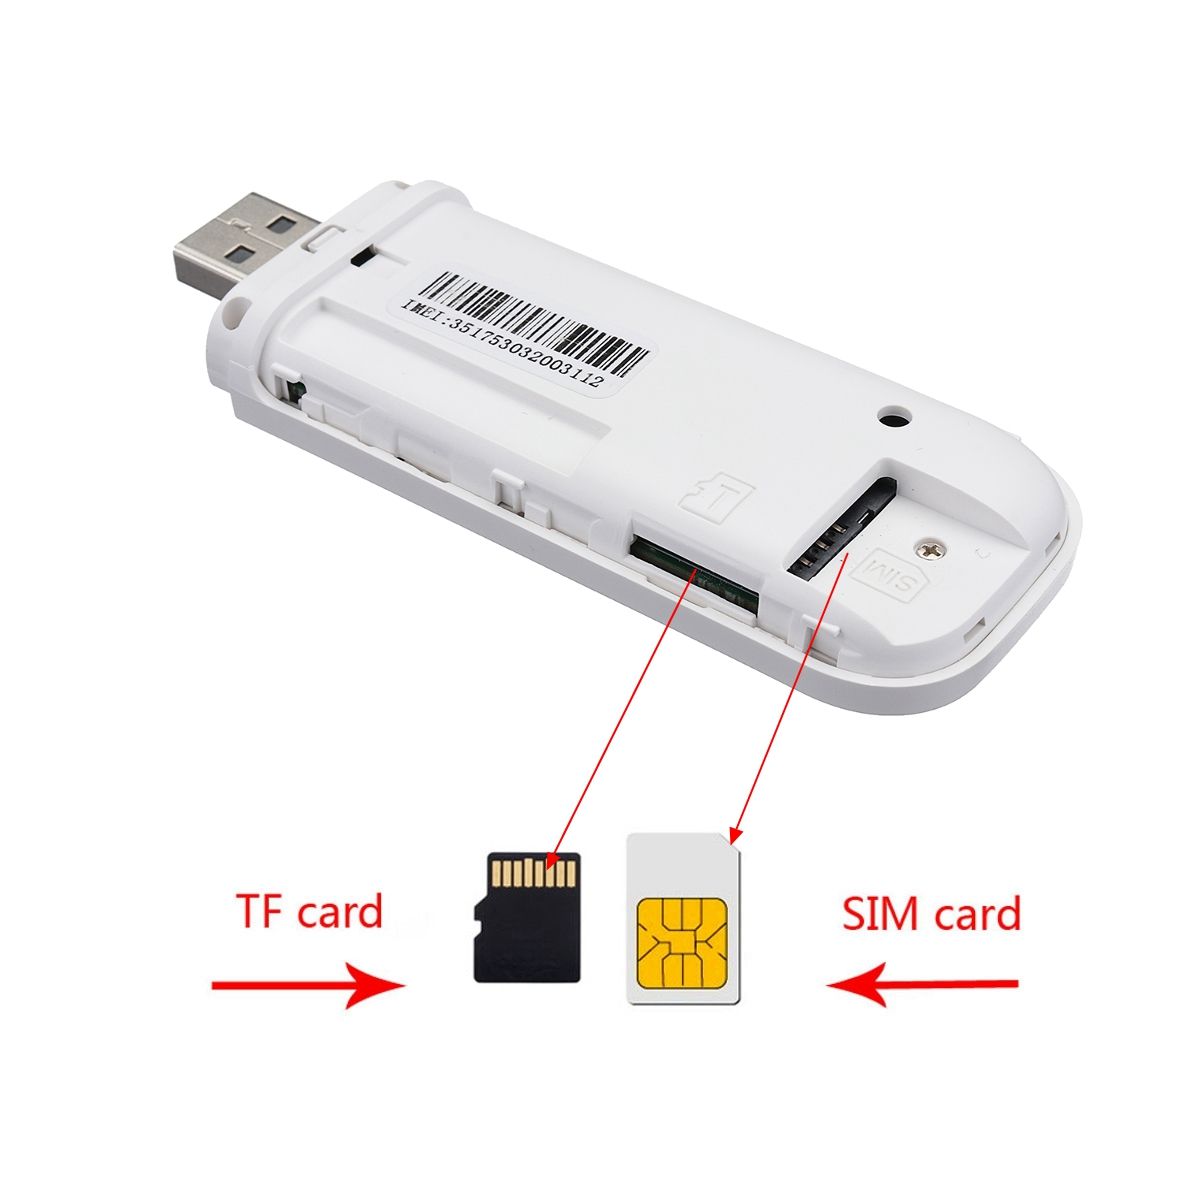 4G-3G-LTE-USB-20-Wireless-WIFI-Mobile-Hotspot-Dongle-Router-with-SIM-TF-Card-Slot-for-Mobile-Phone-T-1420919